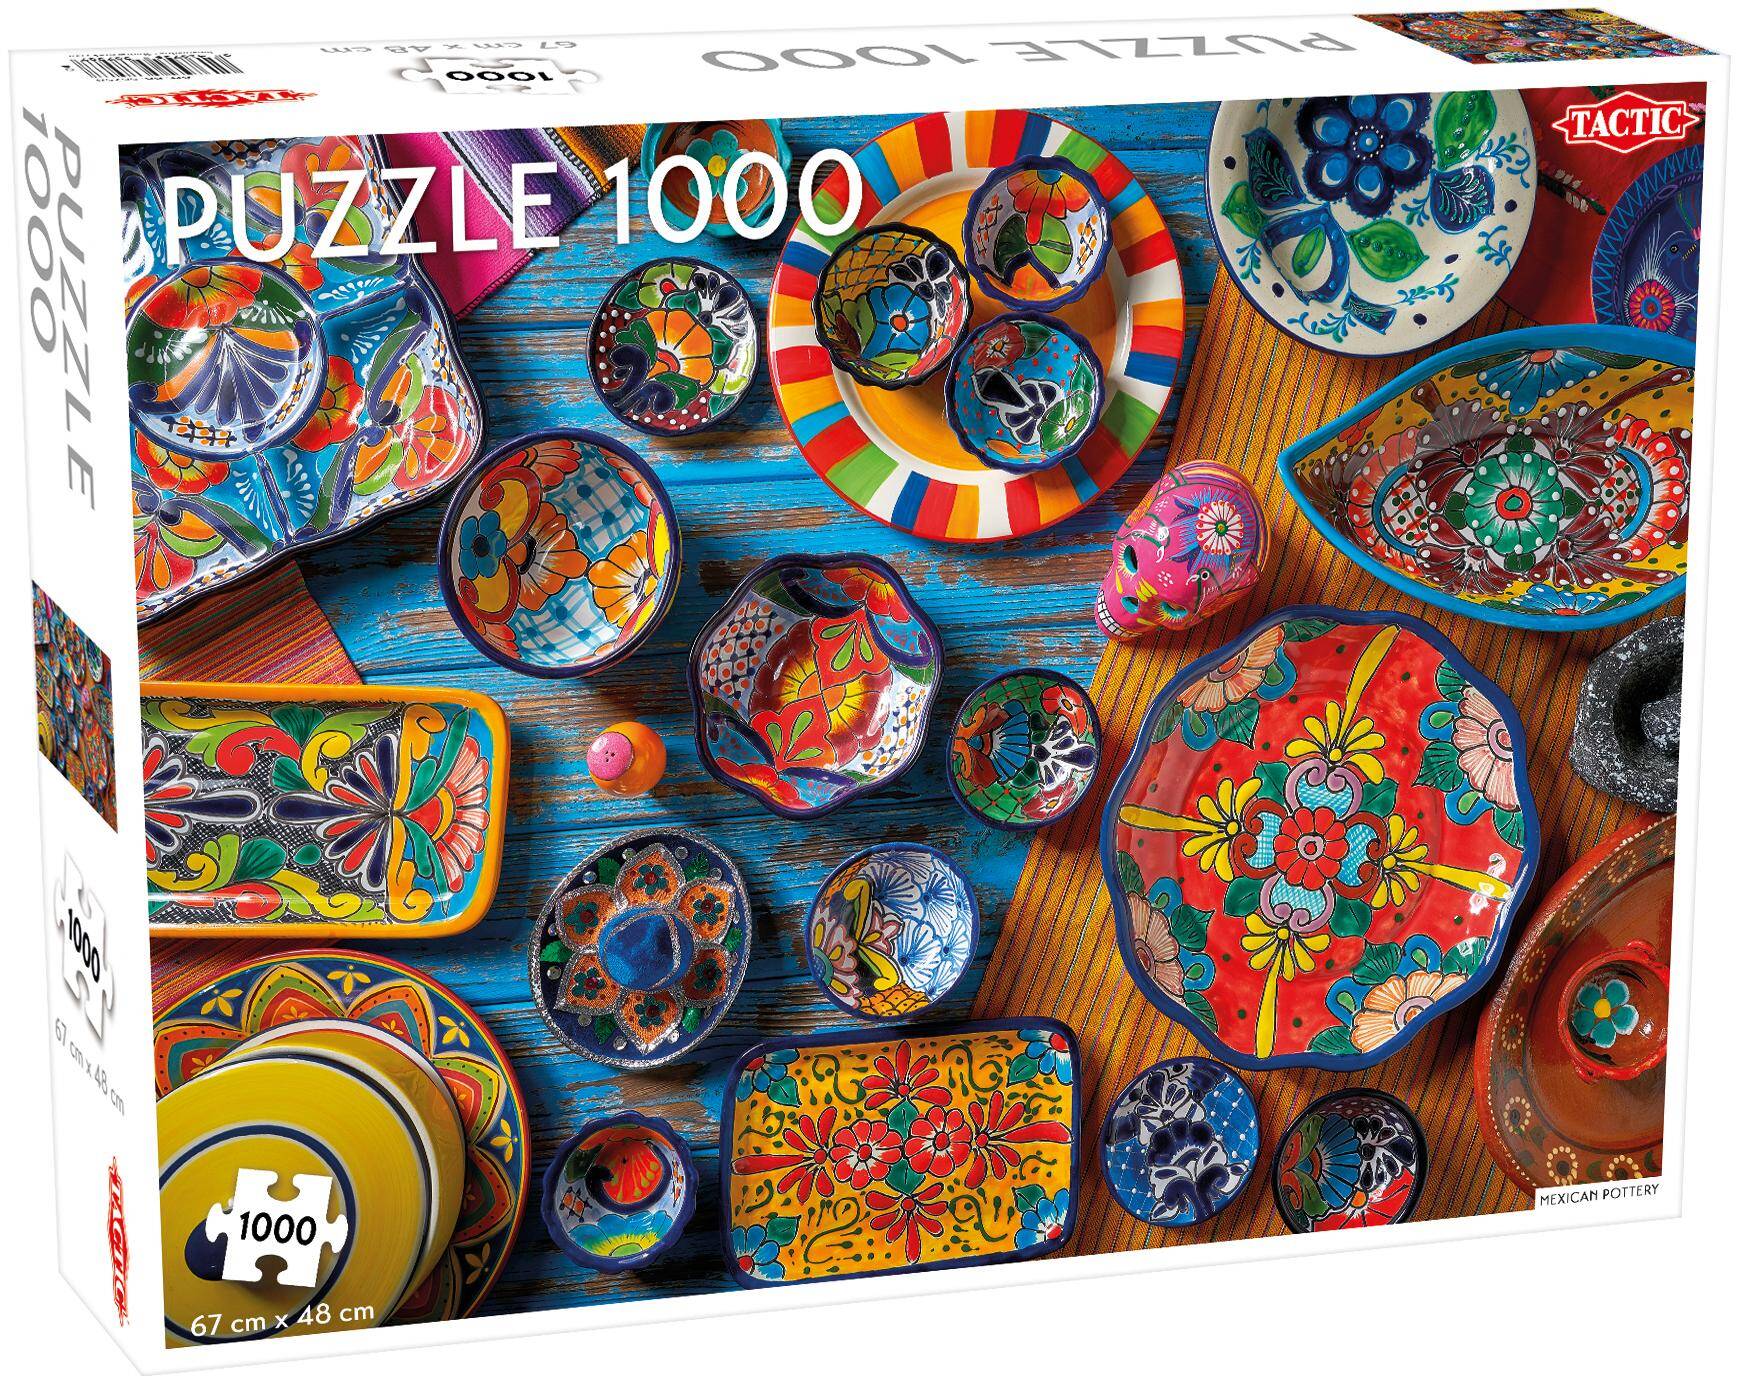 Puzzle 1000 Lover's Special Mexican Pottery